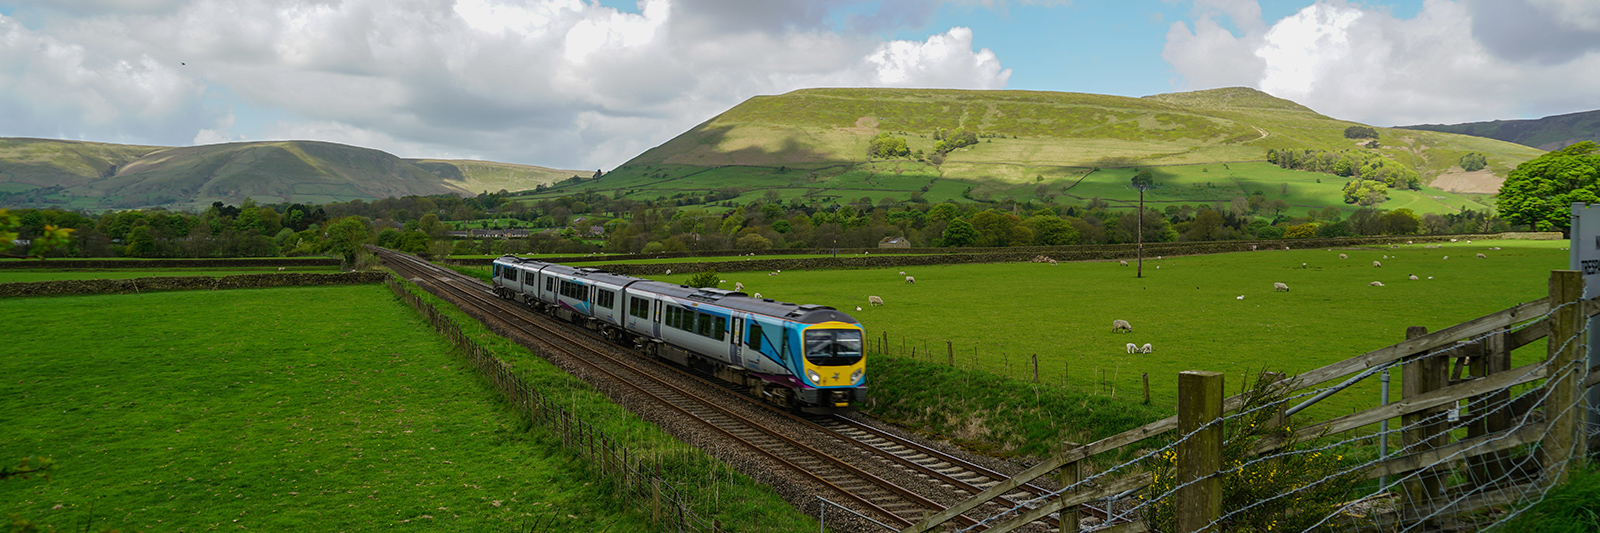 A train from the Trans-Pennine Express franchise in the Peak District, Derbyshire, England, UK, 2018.